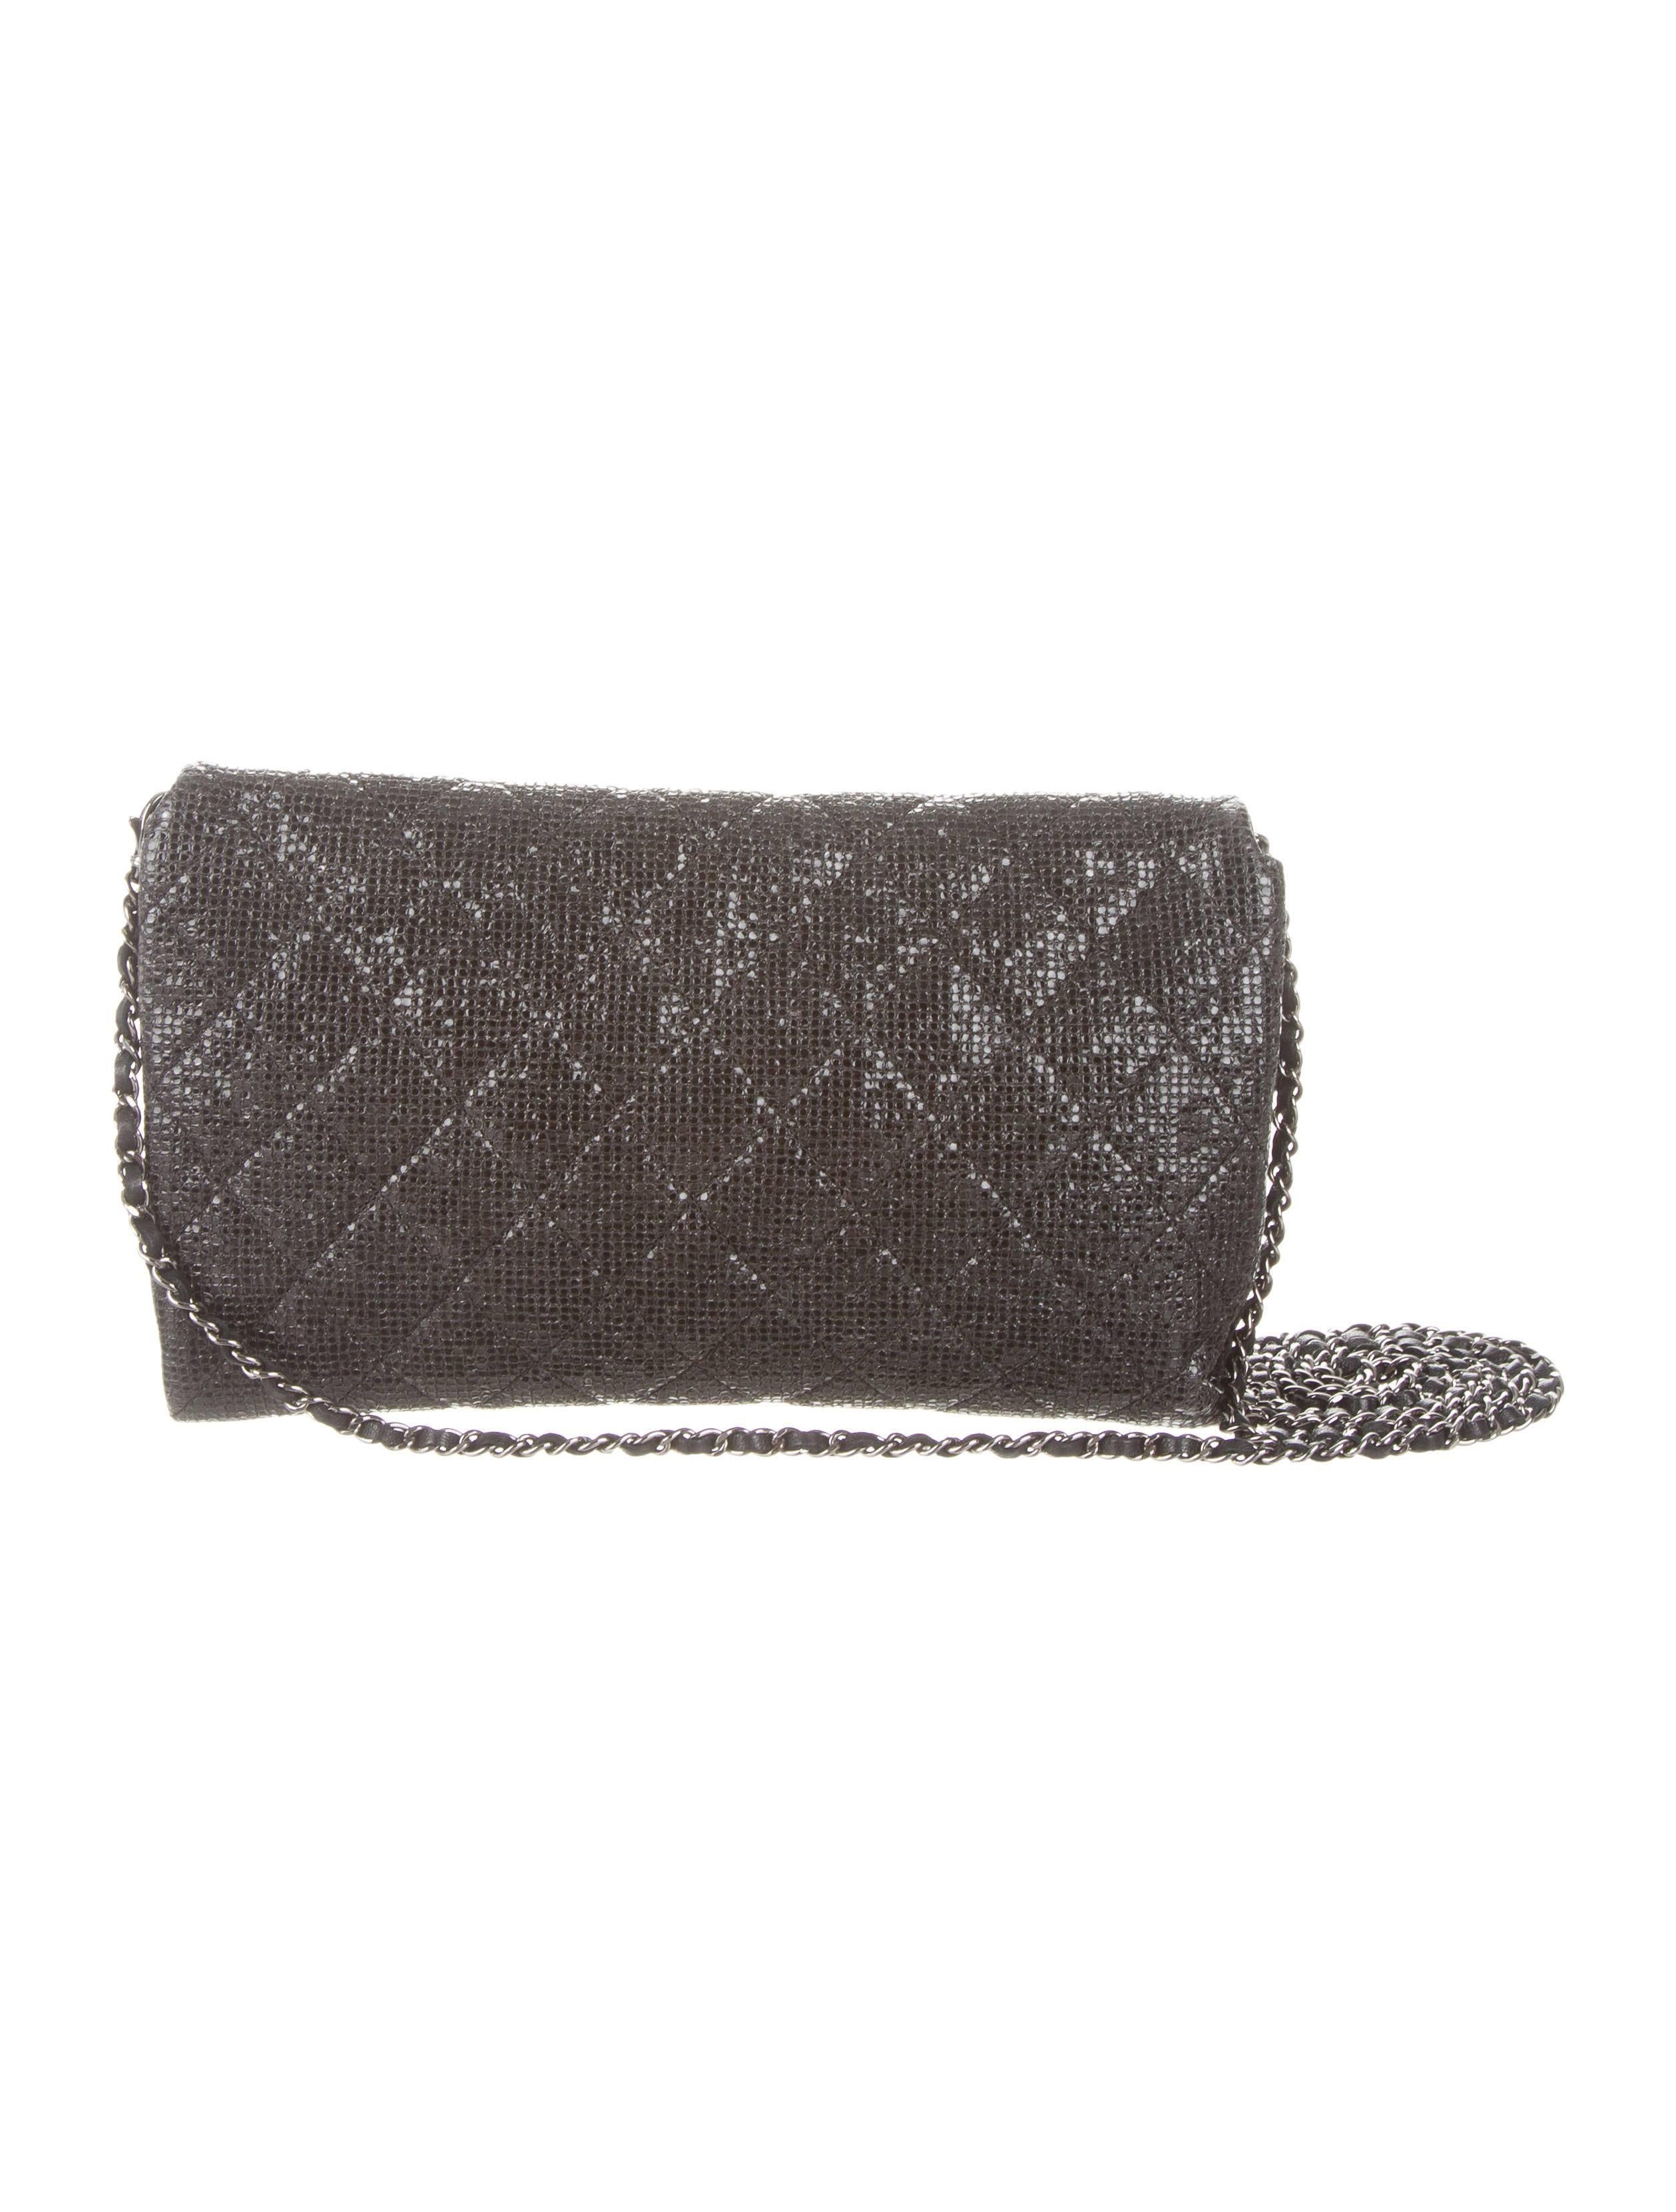 CURATOR'S NOTES

Gorgeous black quilted sequin Chanel crossbody bag featuring silver hardware and chain-link shoulder strap. Perfect for evenings out or special occasions.  Priced to sell.

Sequin
Silver hardware
Satin interior lining
Dual